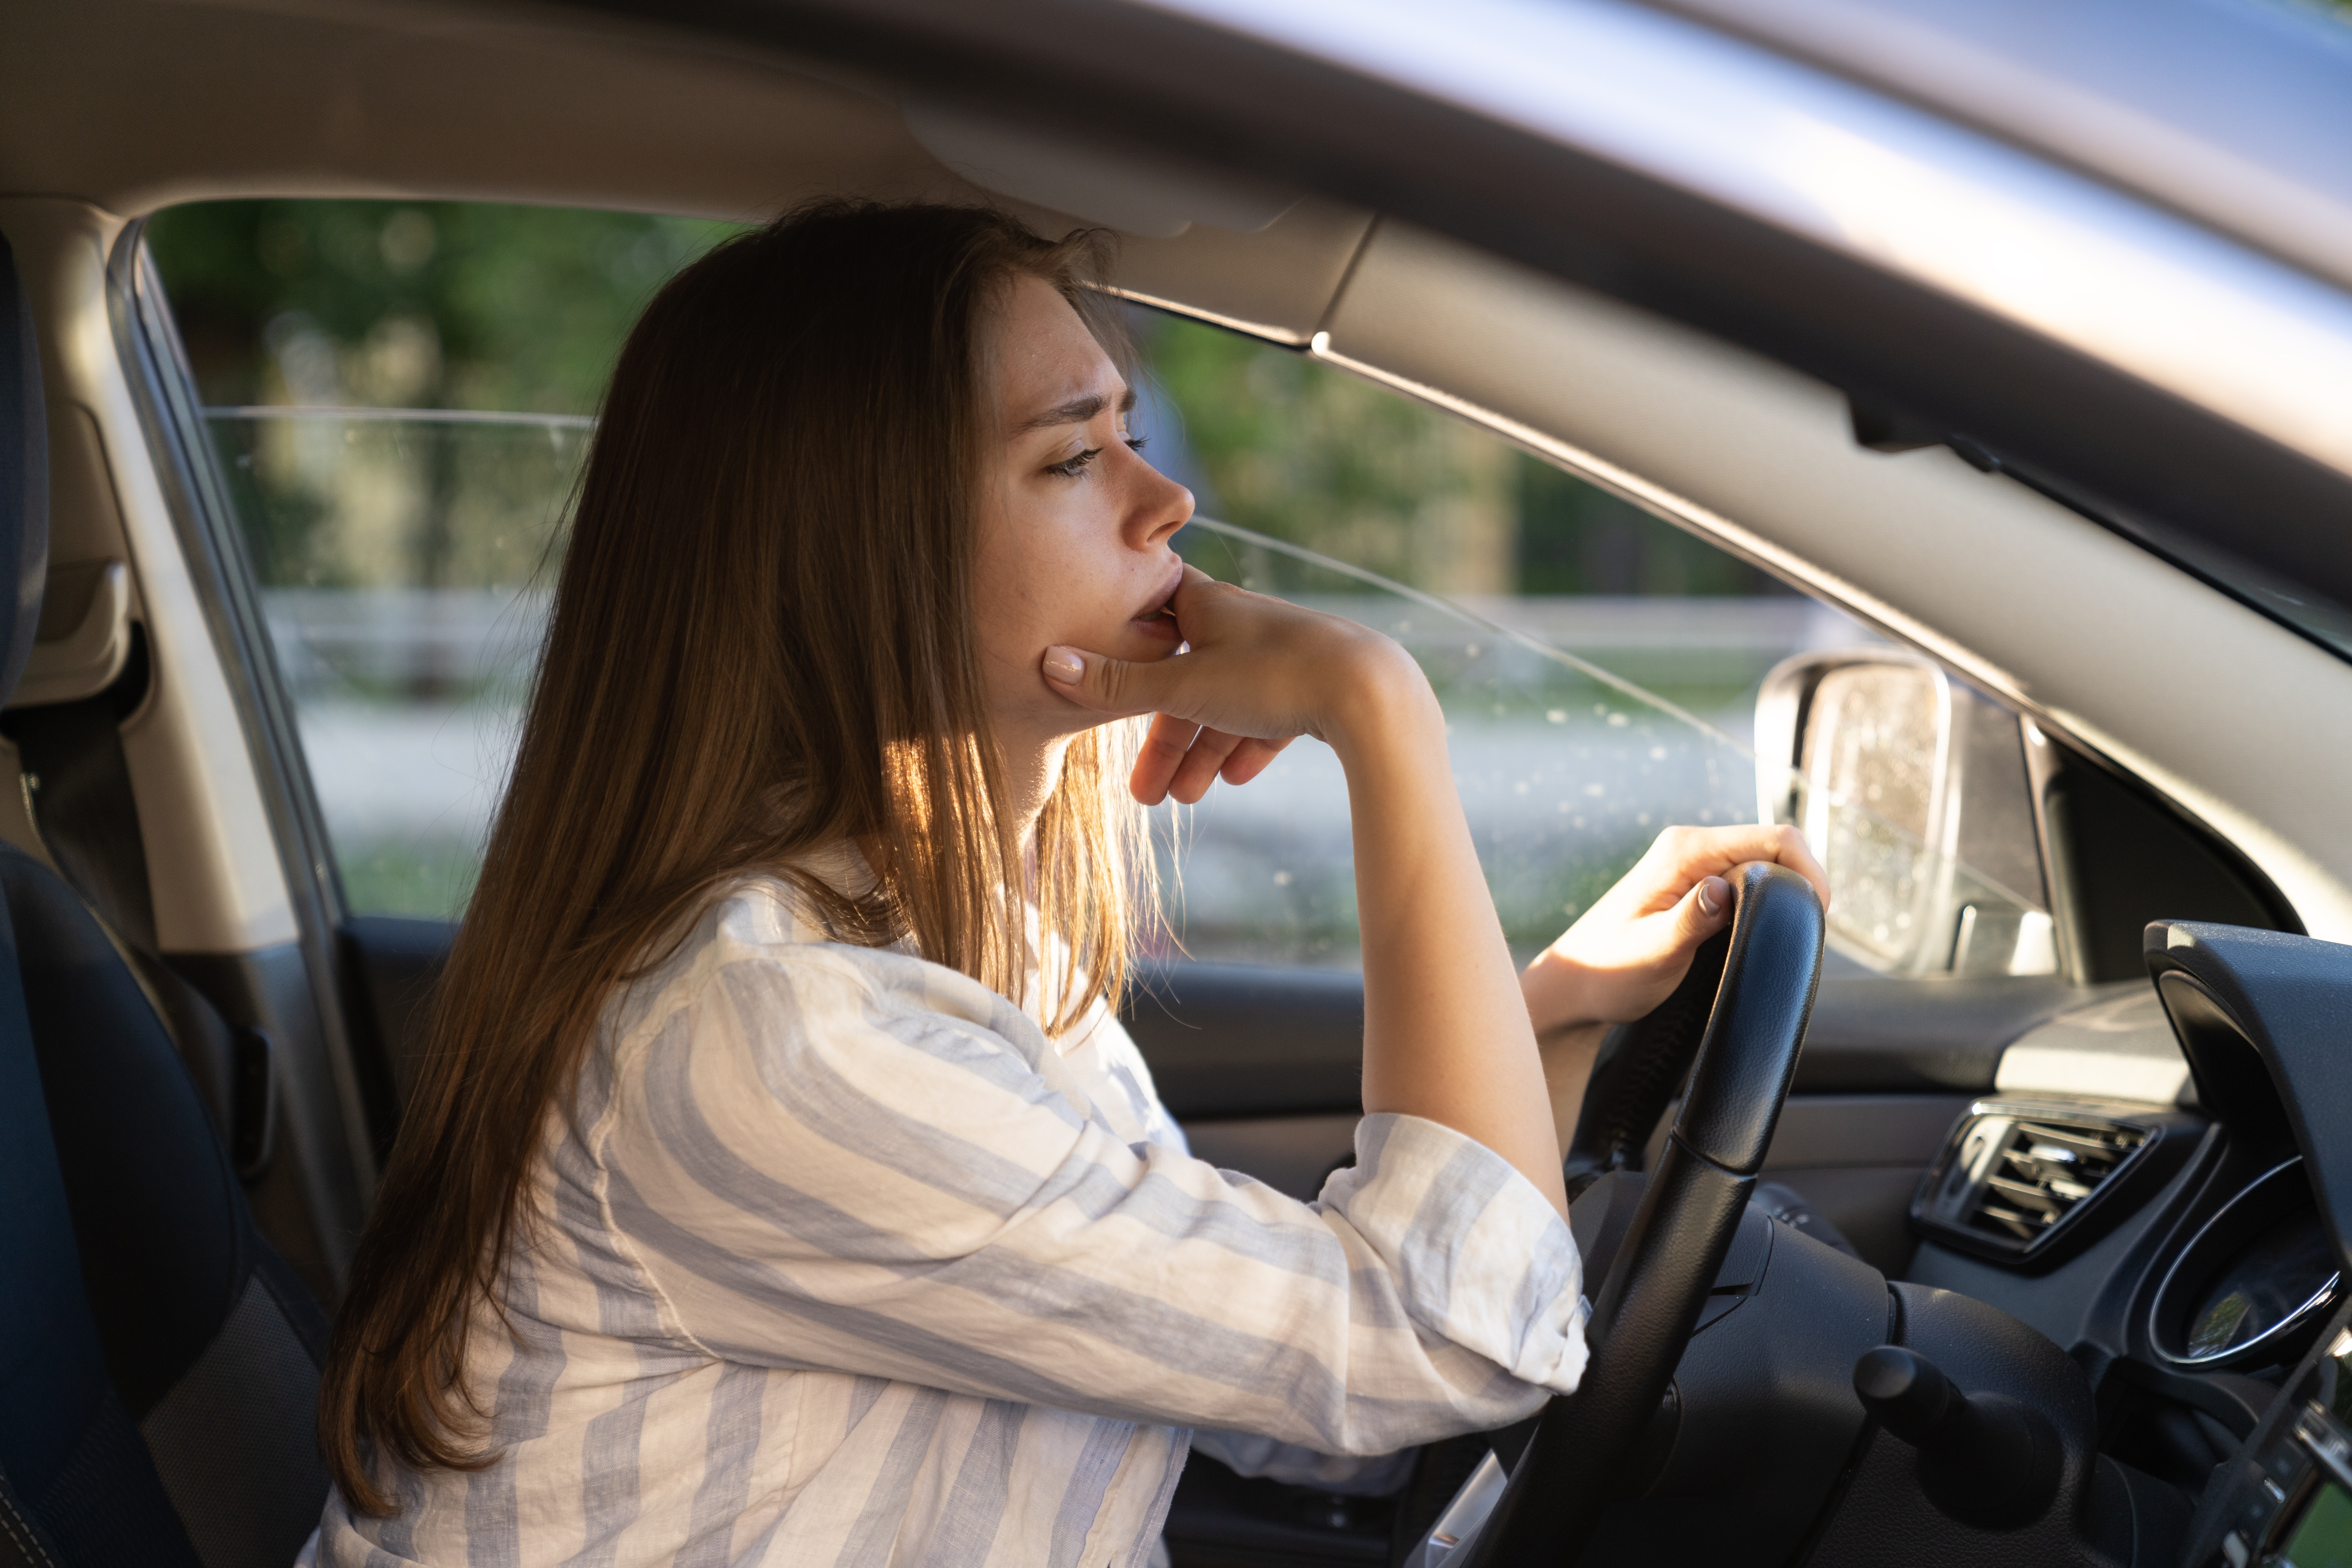 Unhappy young woman driving a car | Source: Shutterstock